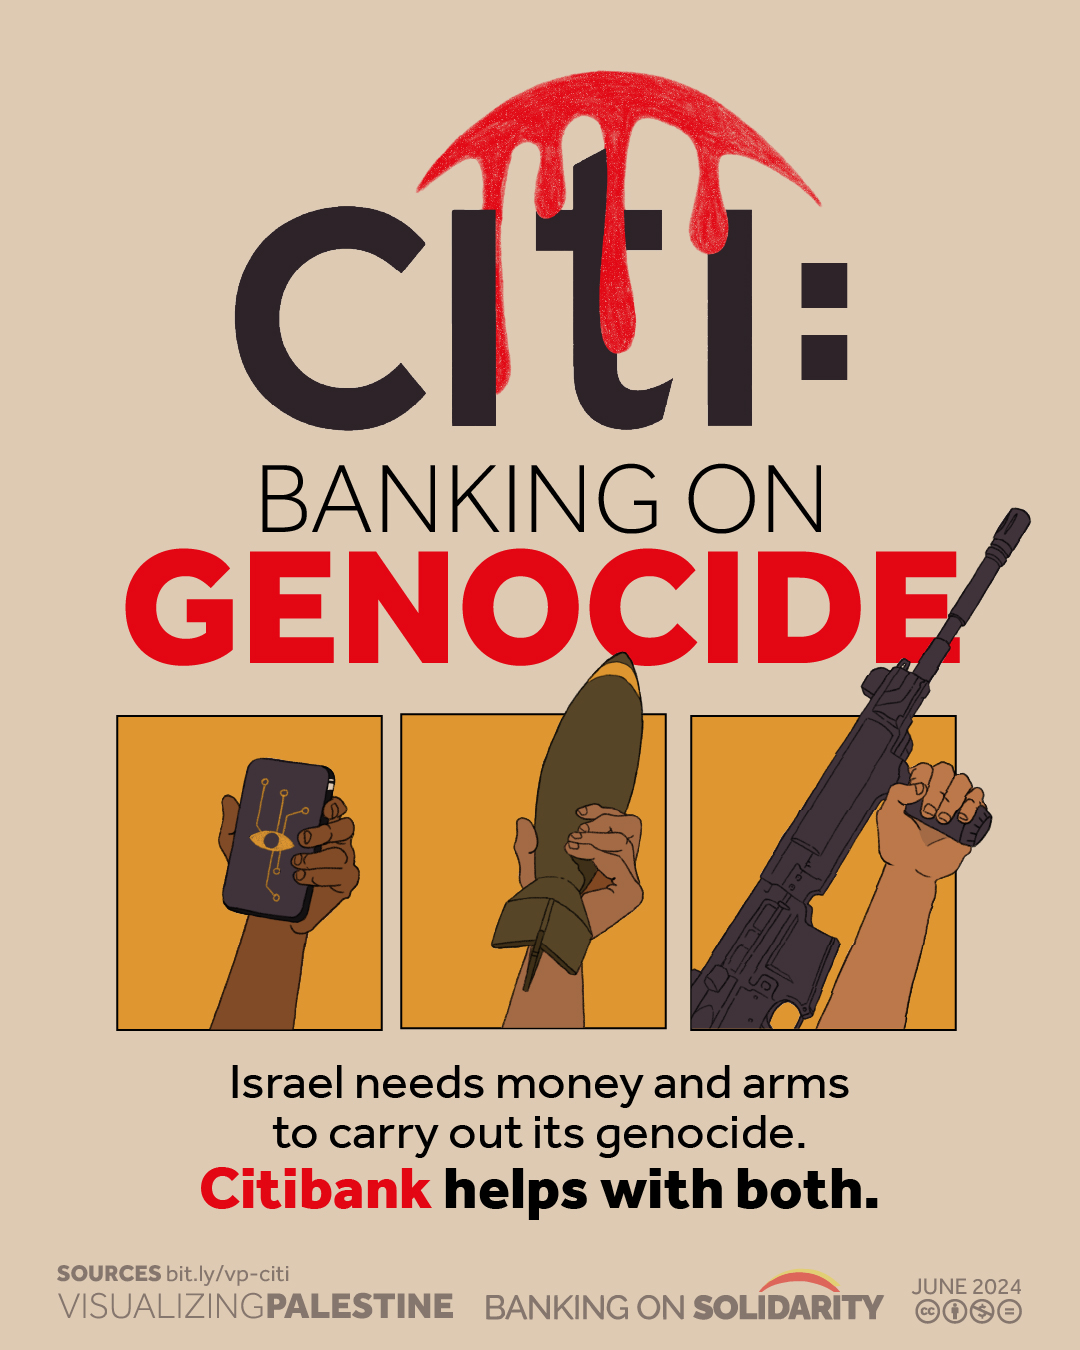 Citi is banking on genocide and fossil fuels